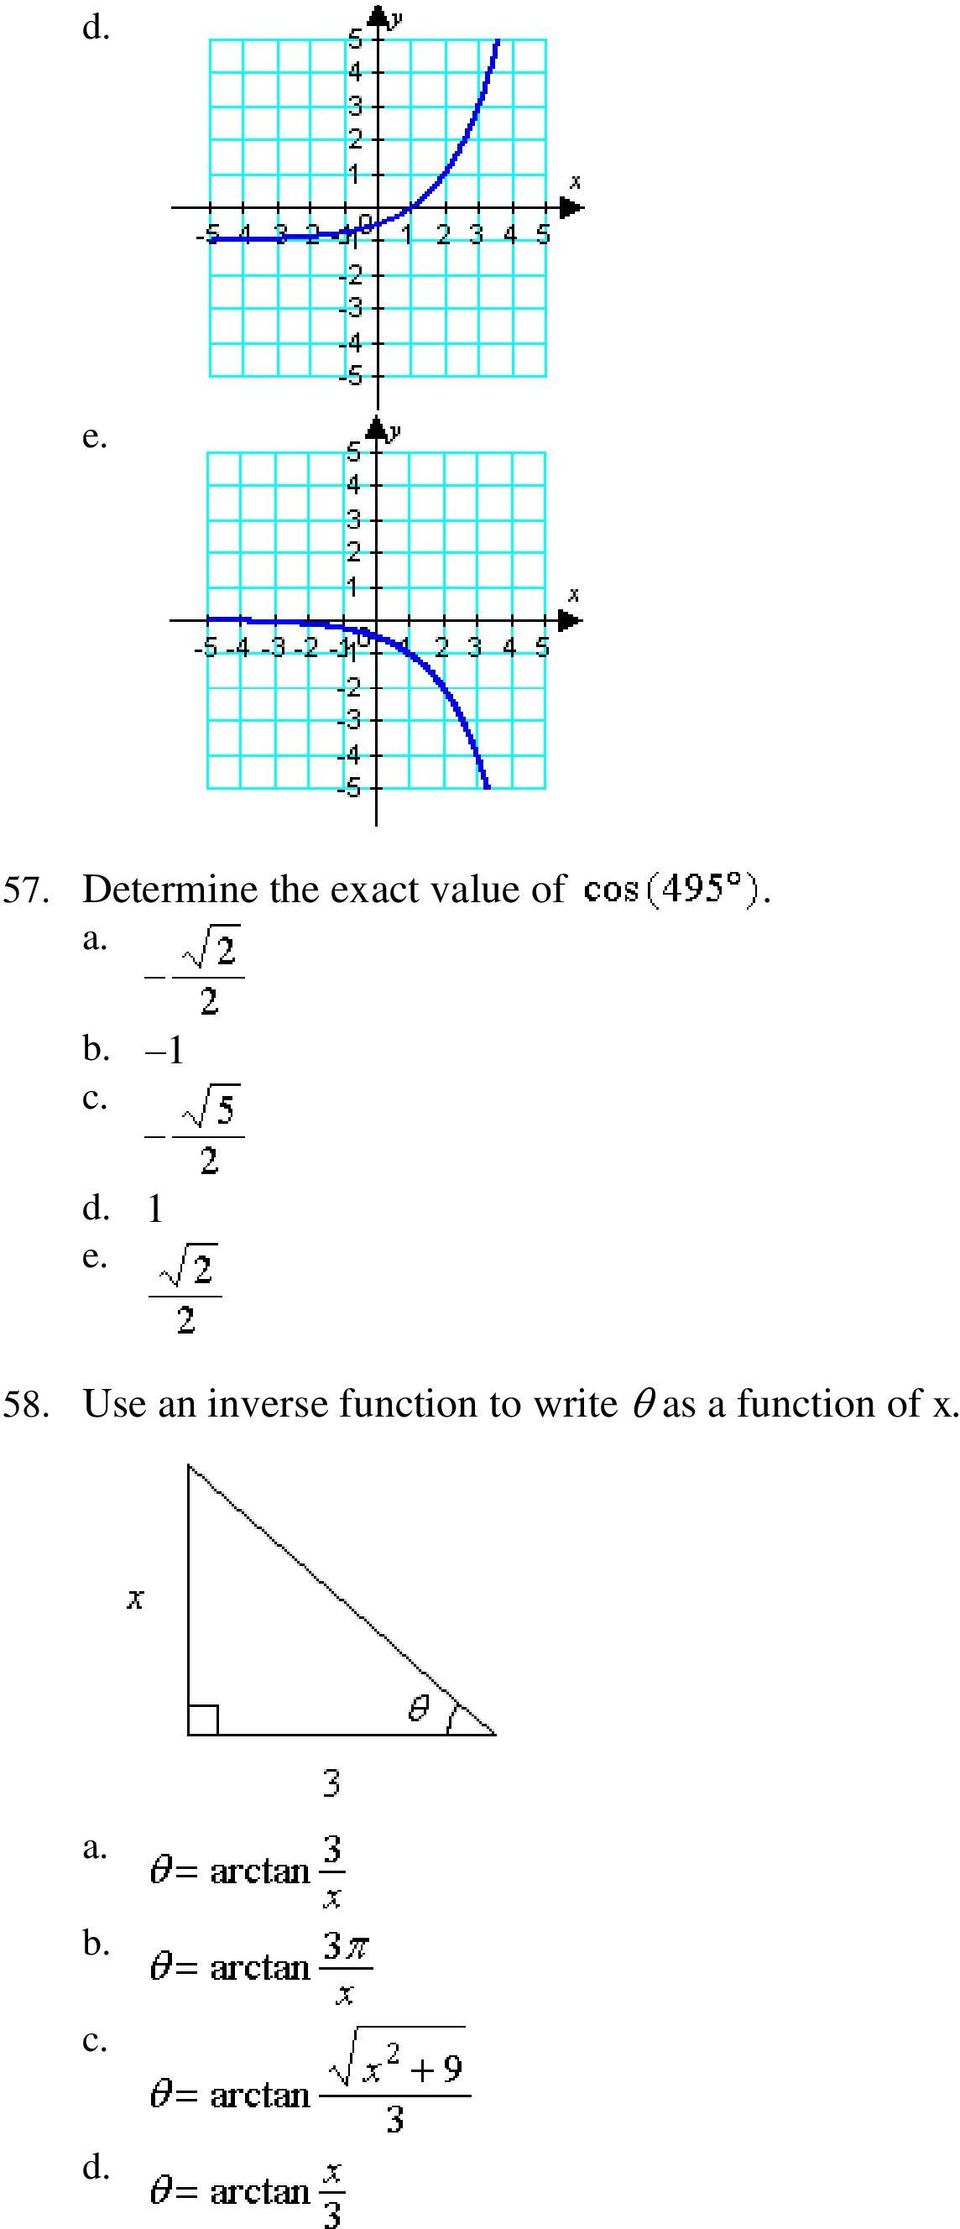 Use an inverse function